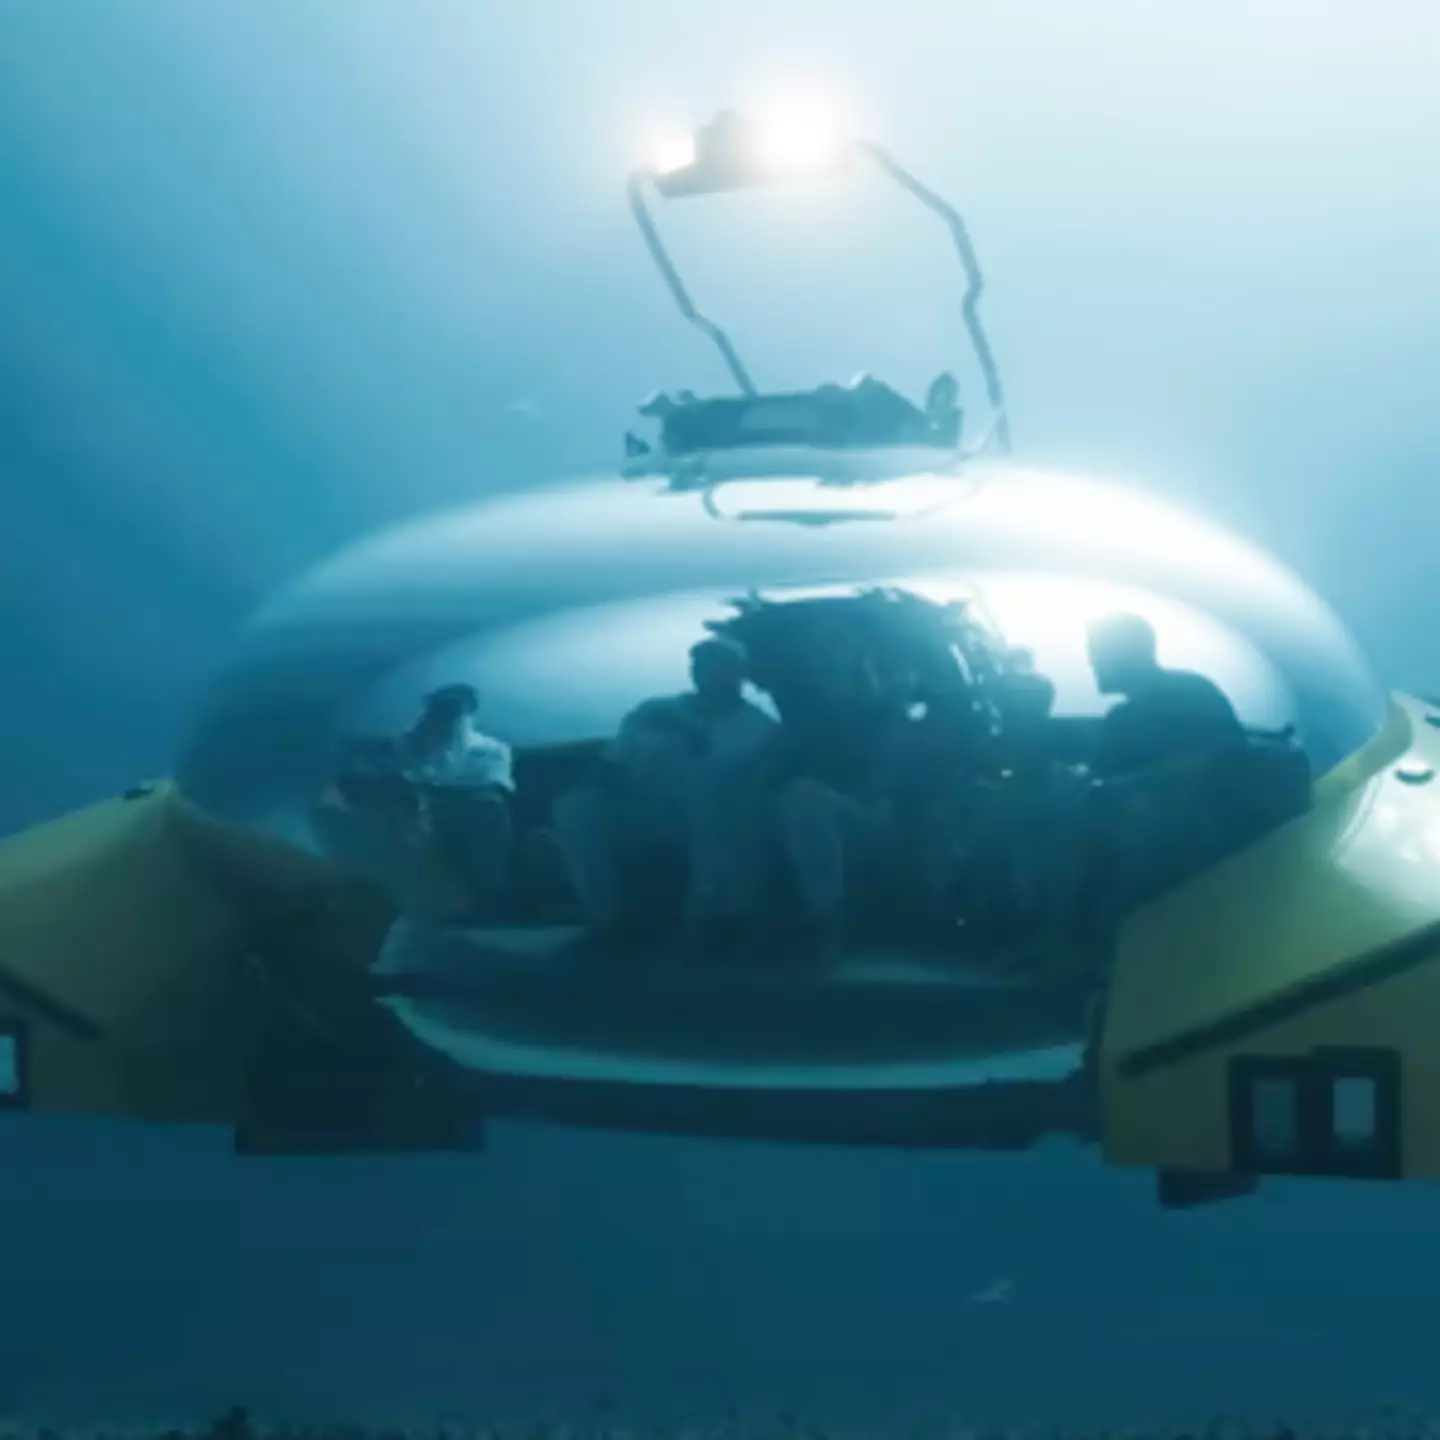 Inside incredible new 'UFO looking' submarine launched as the ultimate vessel for deep sea sightseeing